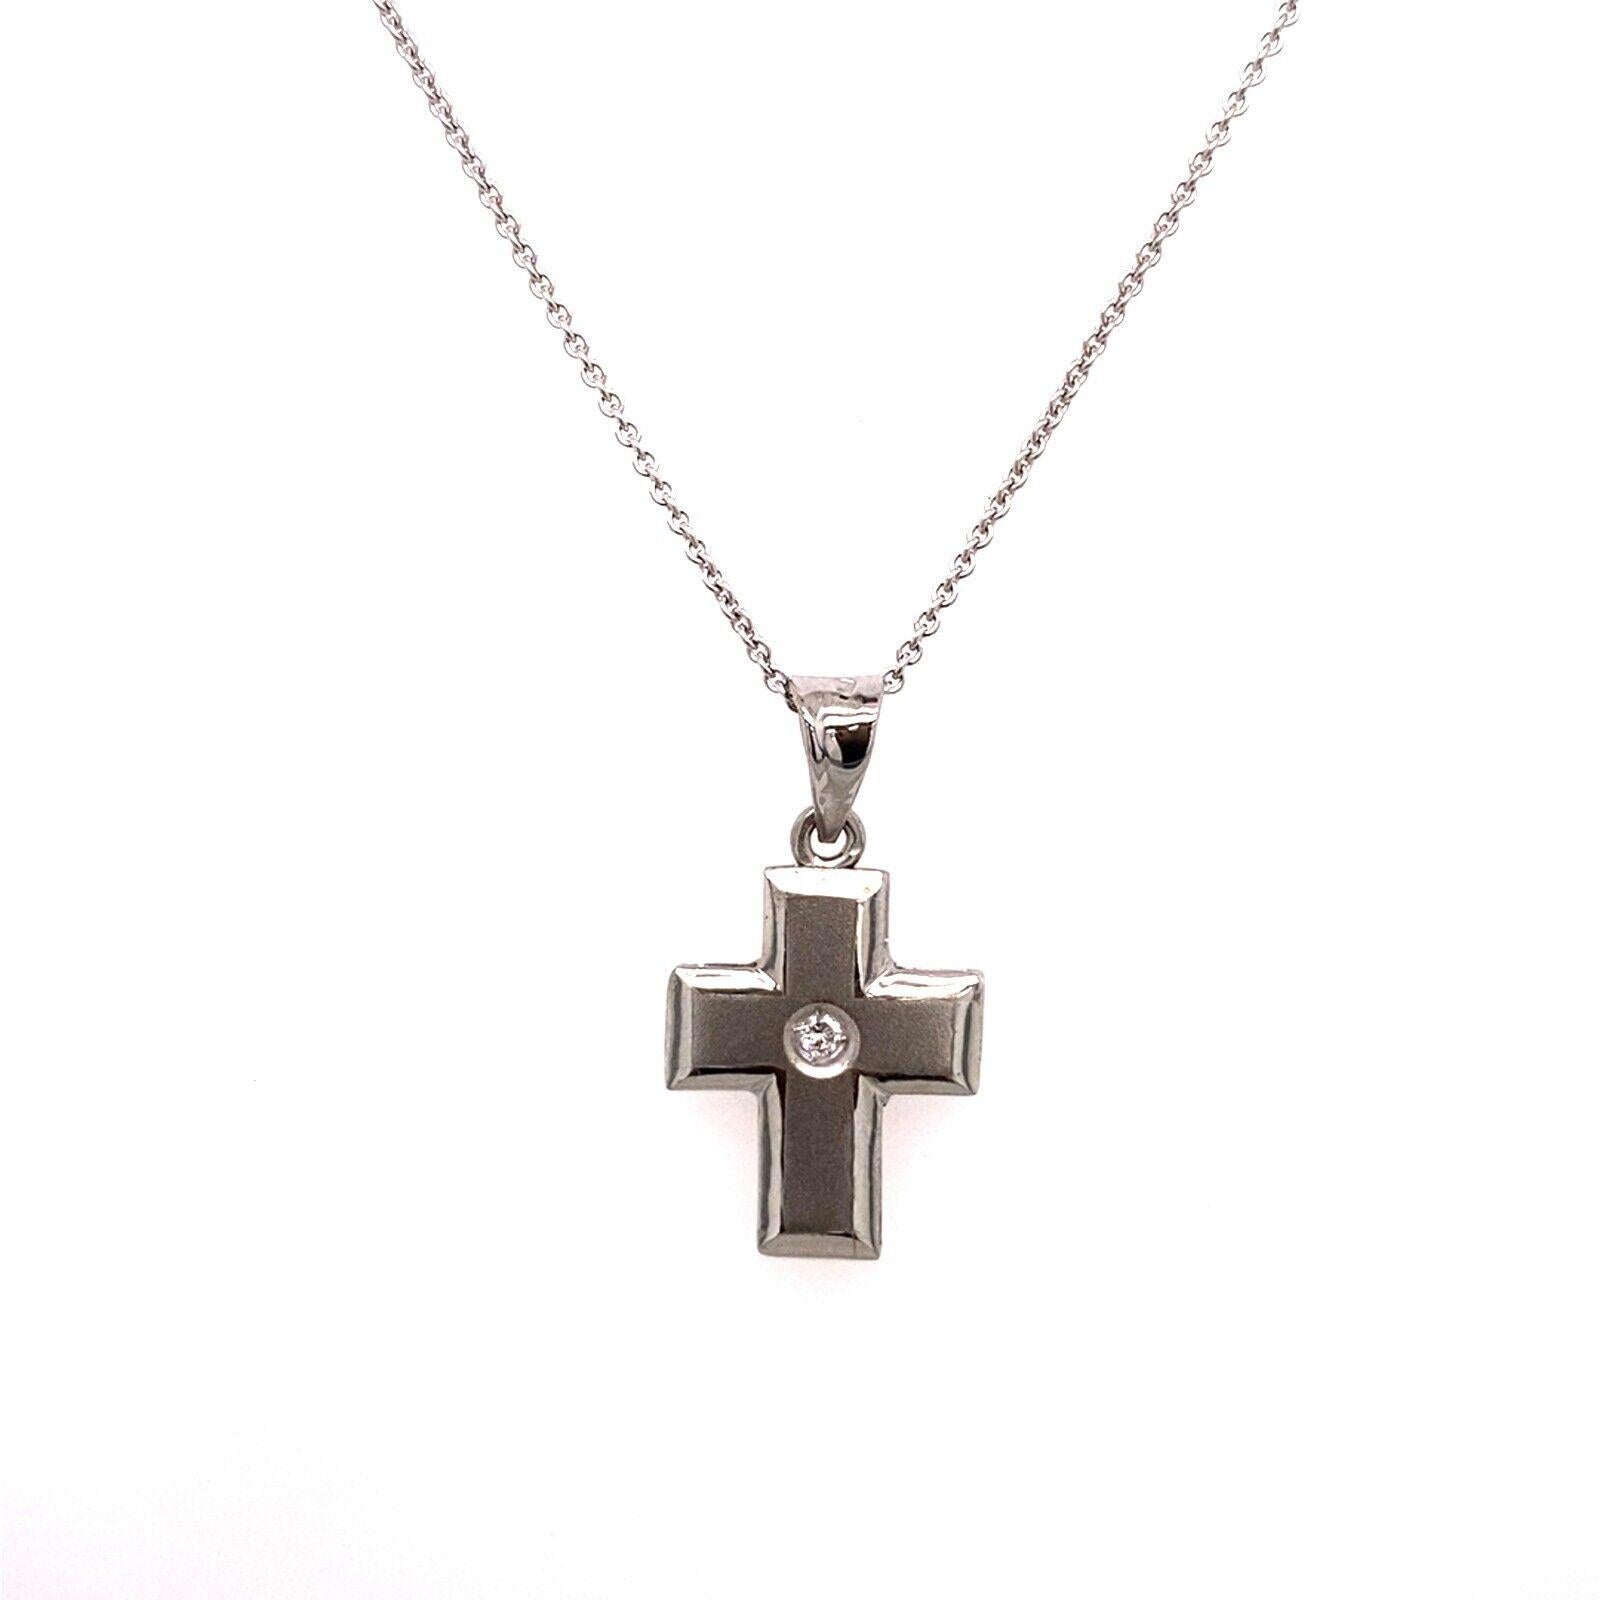 This delicate 18ct White Gold Diamond cross with matt finish, features a 0.05ct G-H/SI round brilliant cut Diamond, suspended on 18ct White Gold chain, can be worn with a 16-inch or 18-inch.This pendant is a perfect gift for your loved